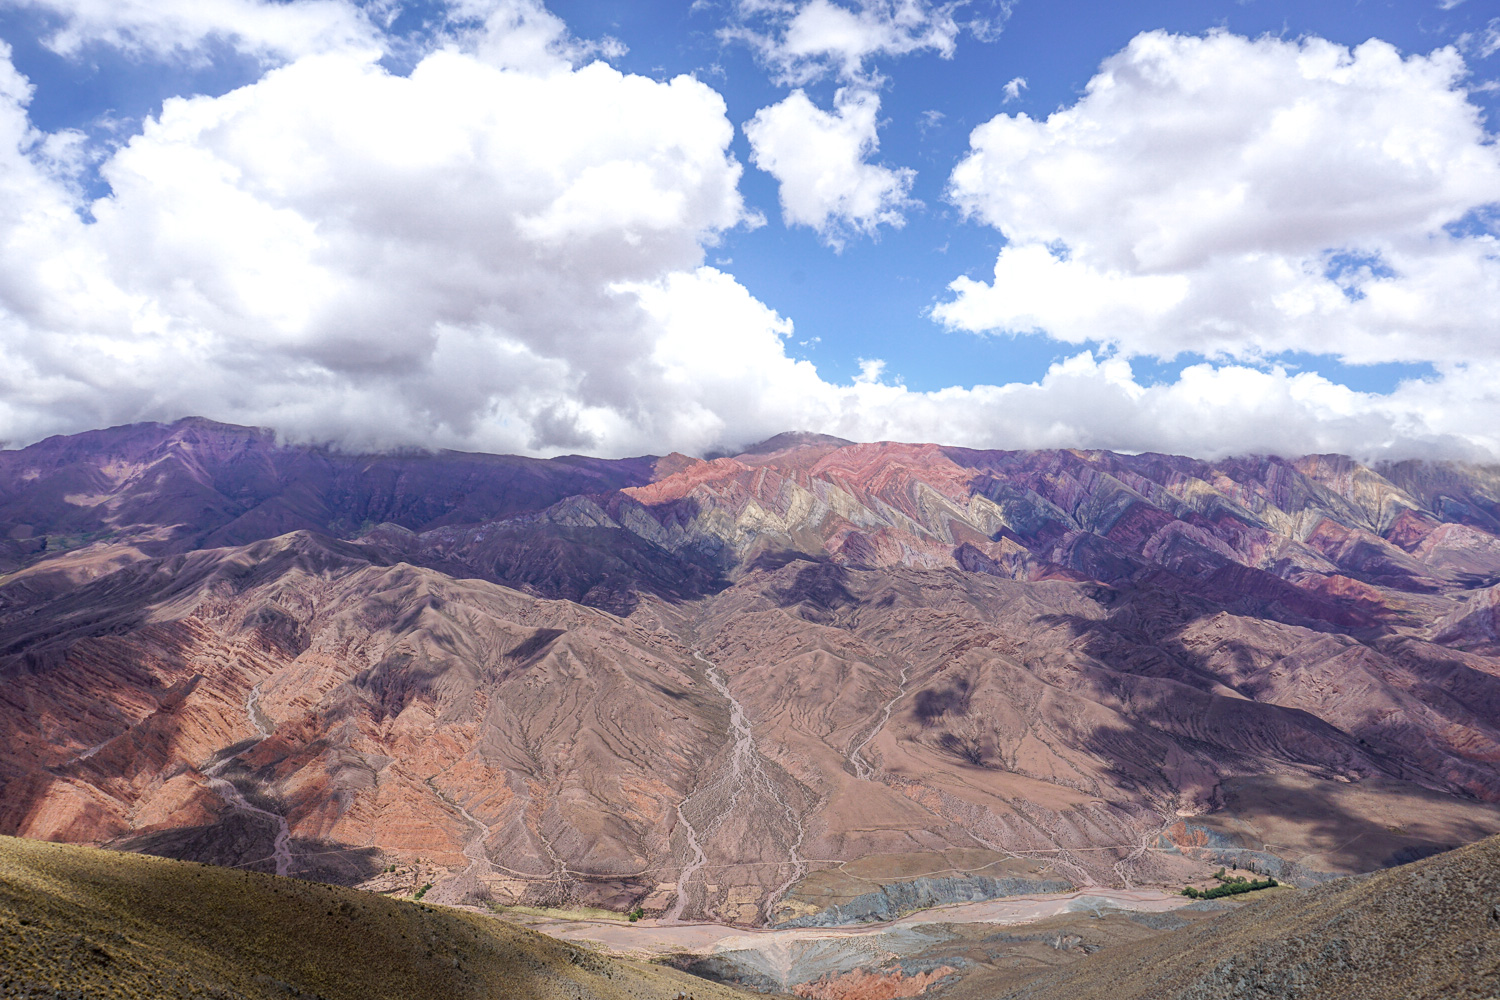  Province of Jujuy Serranía de Hornocal: Best Places to Visit in Argentina